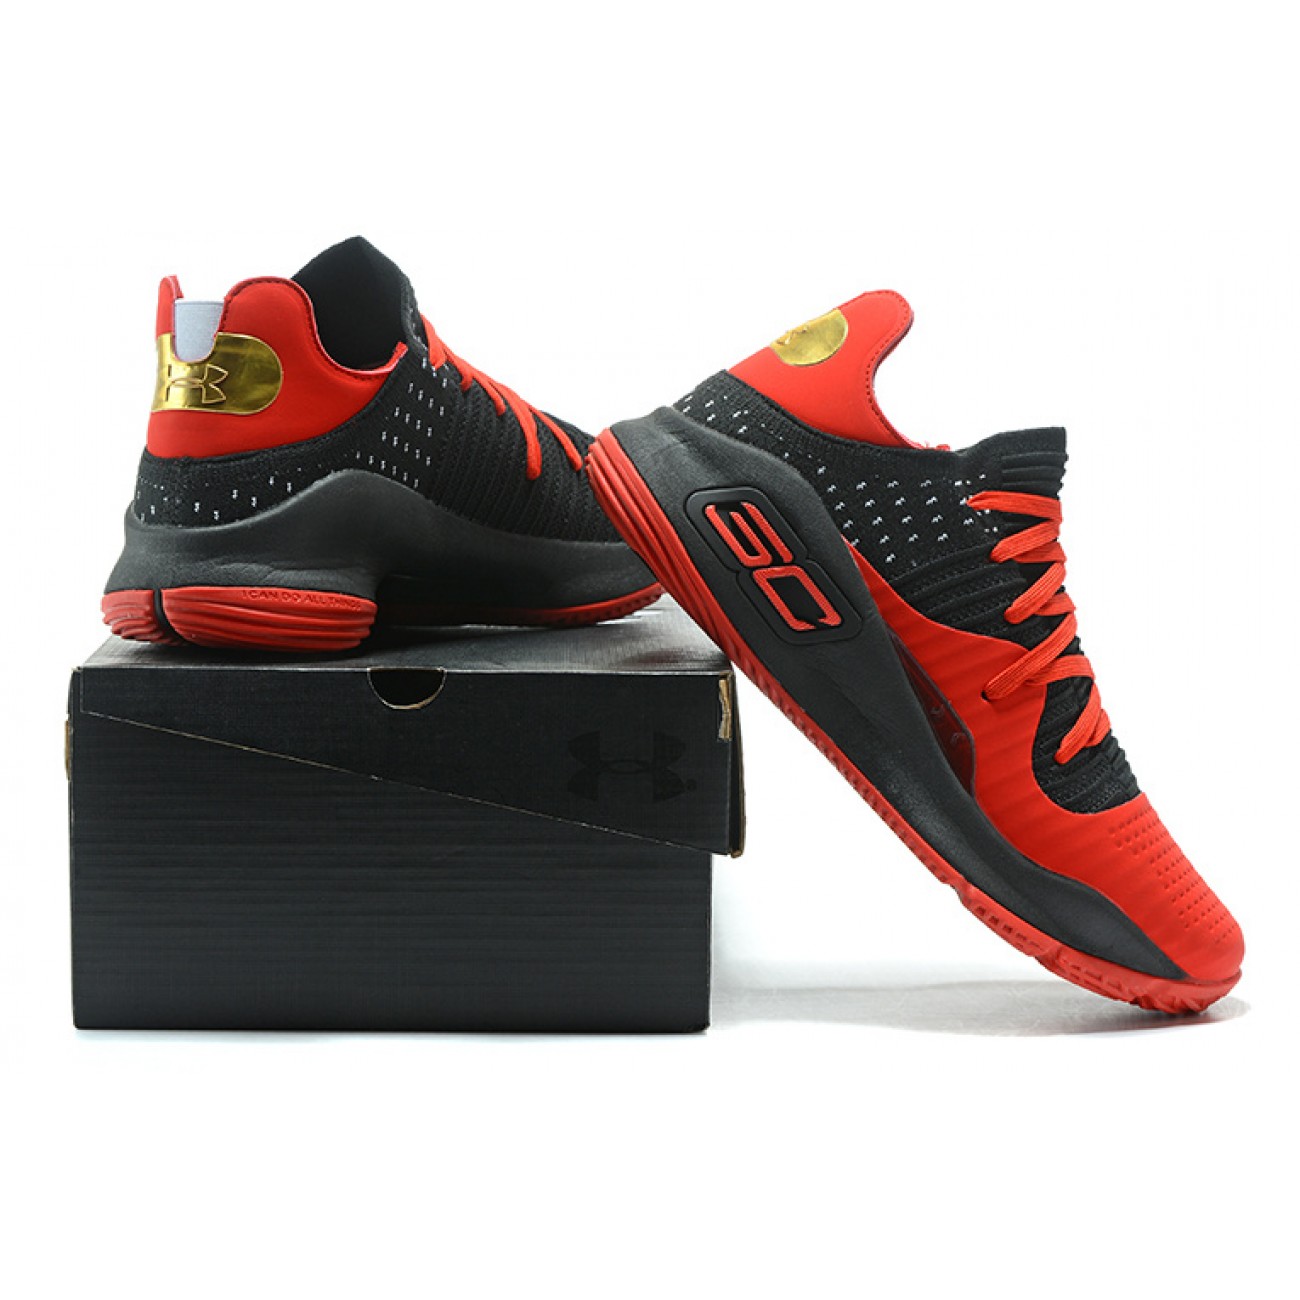 Under Armour UA Curry 4 Low Red/Black